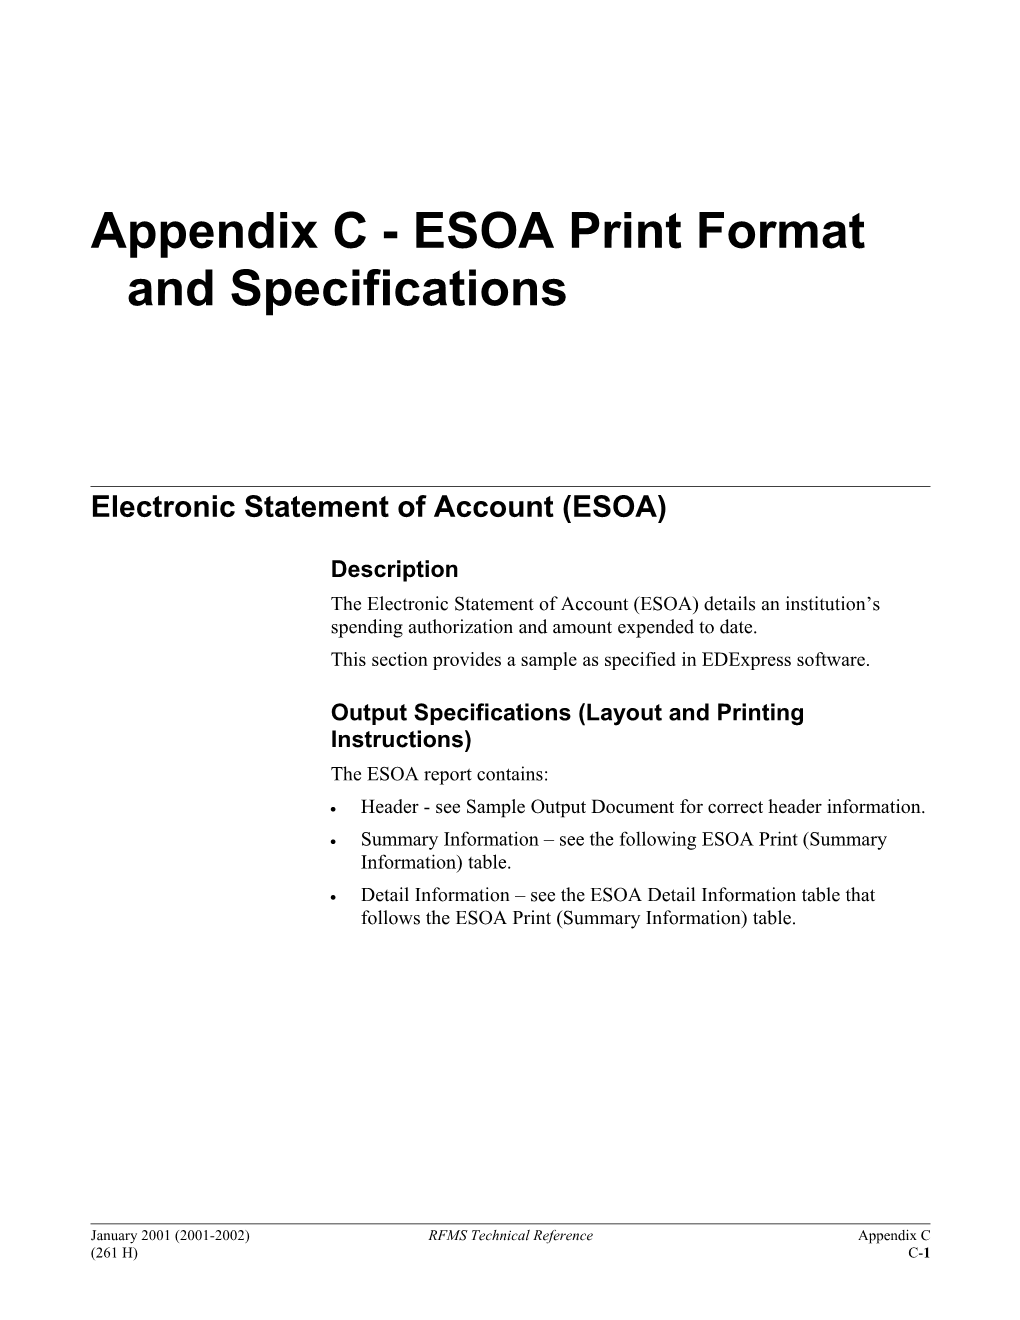 Appendix C - ESOA Print Format and Specifications